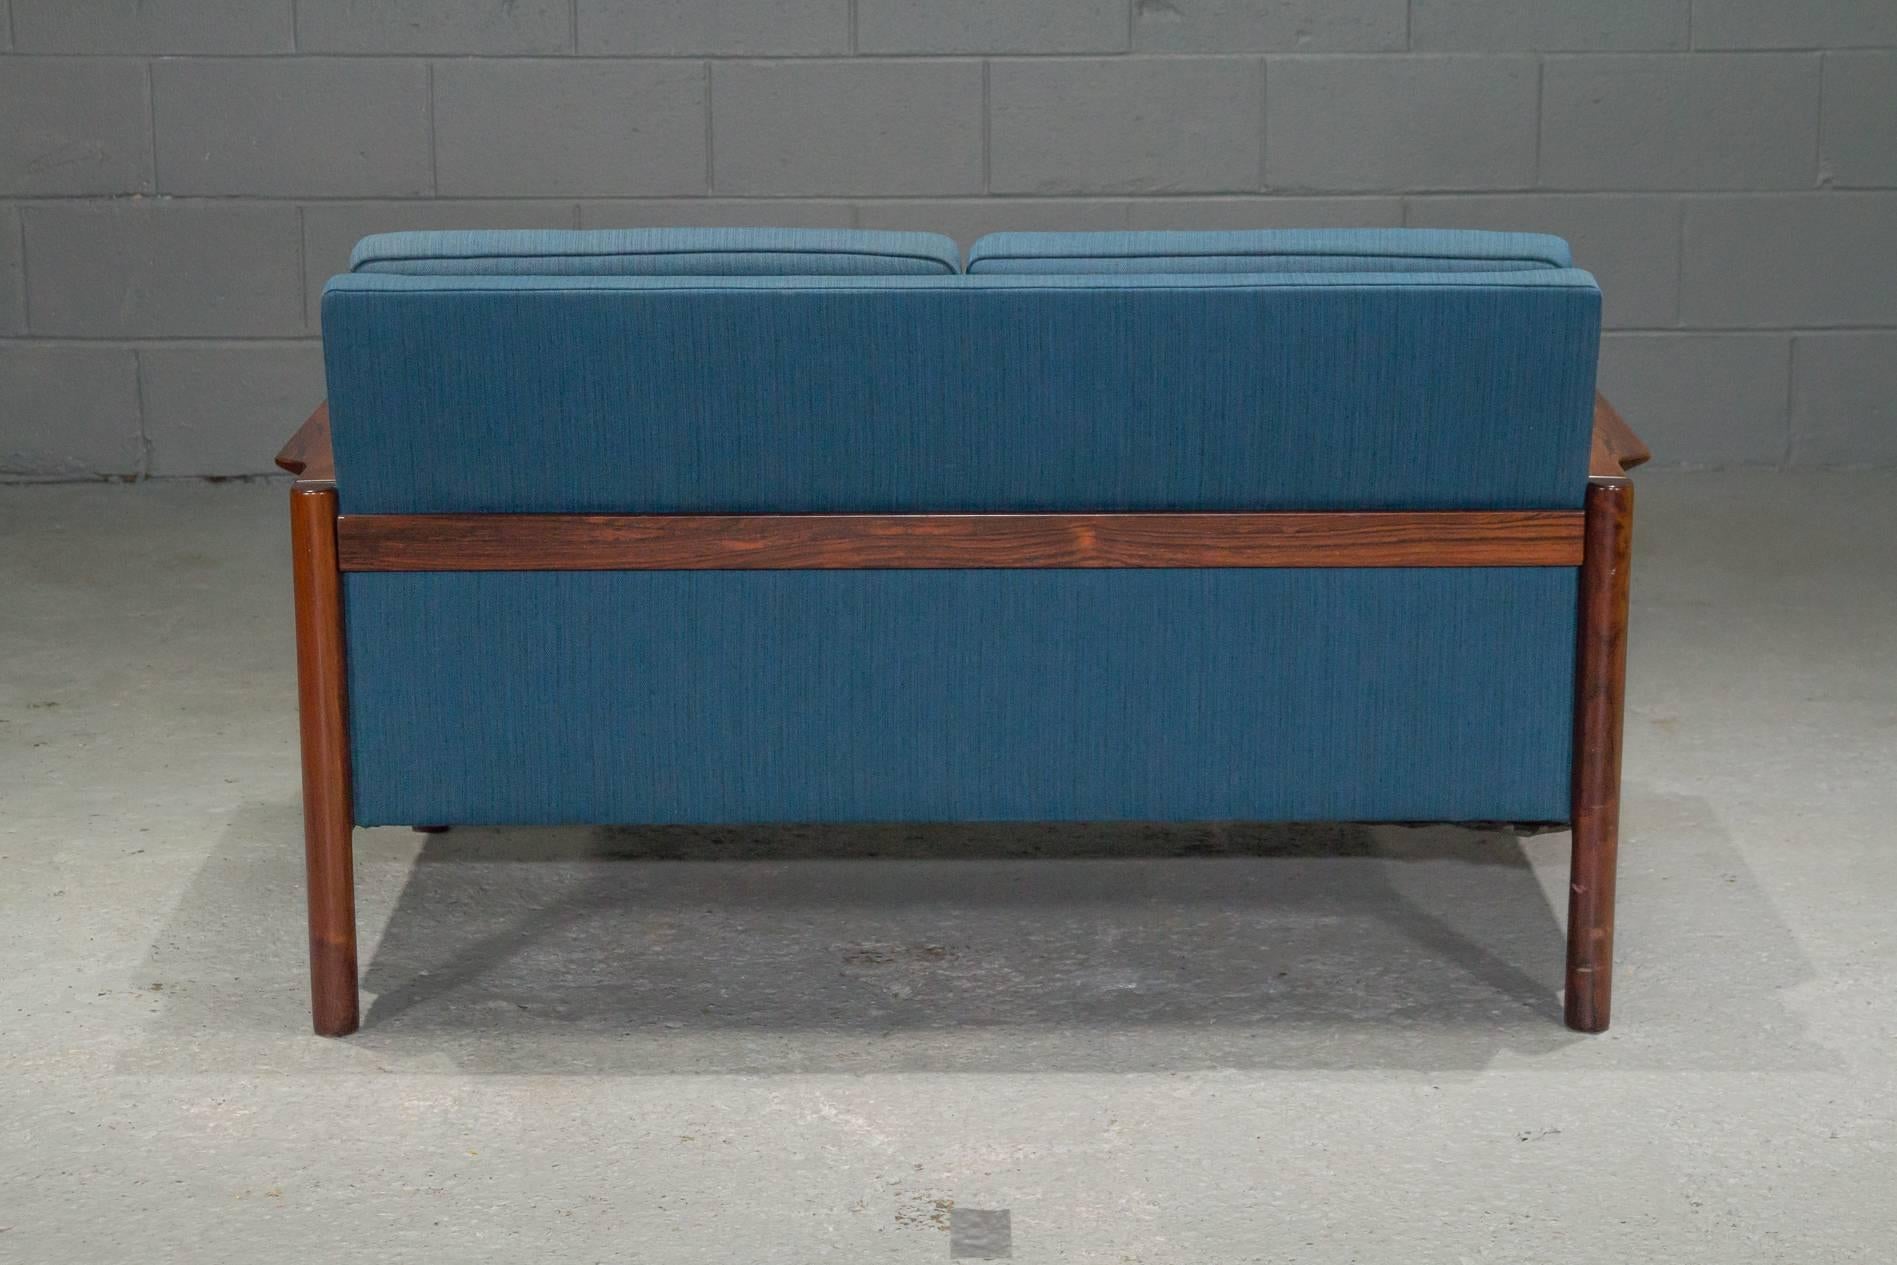 Danish Modern Rosewood Settee with Blue Textile In Good Condition For Sale In Belmont, MA